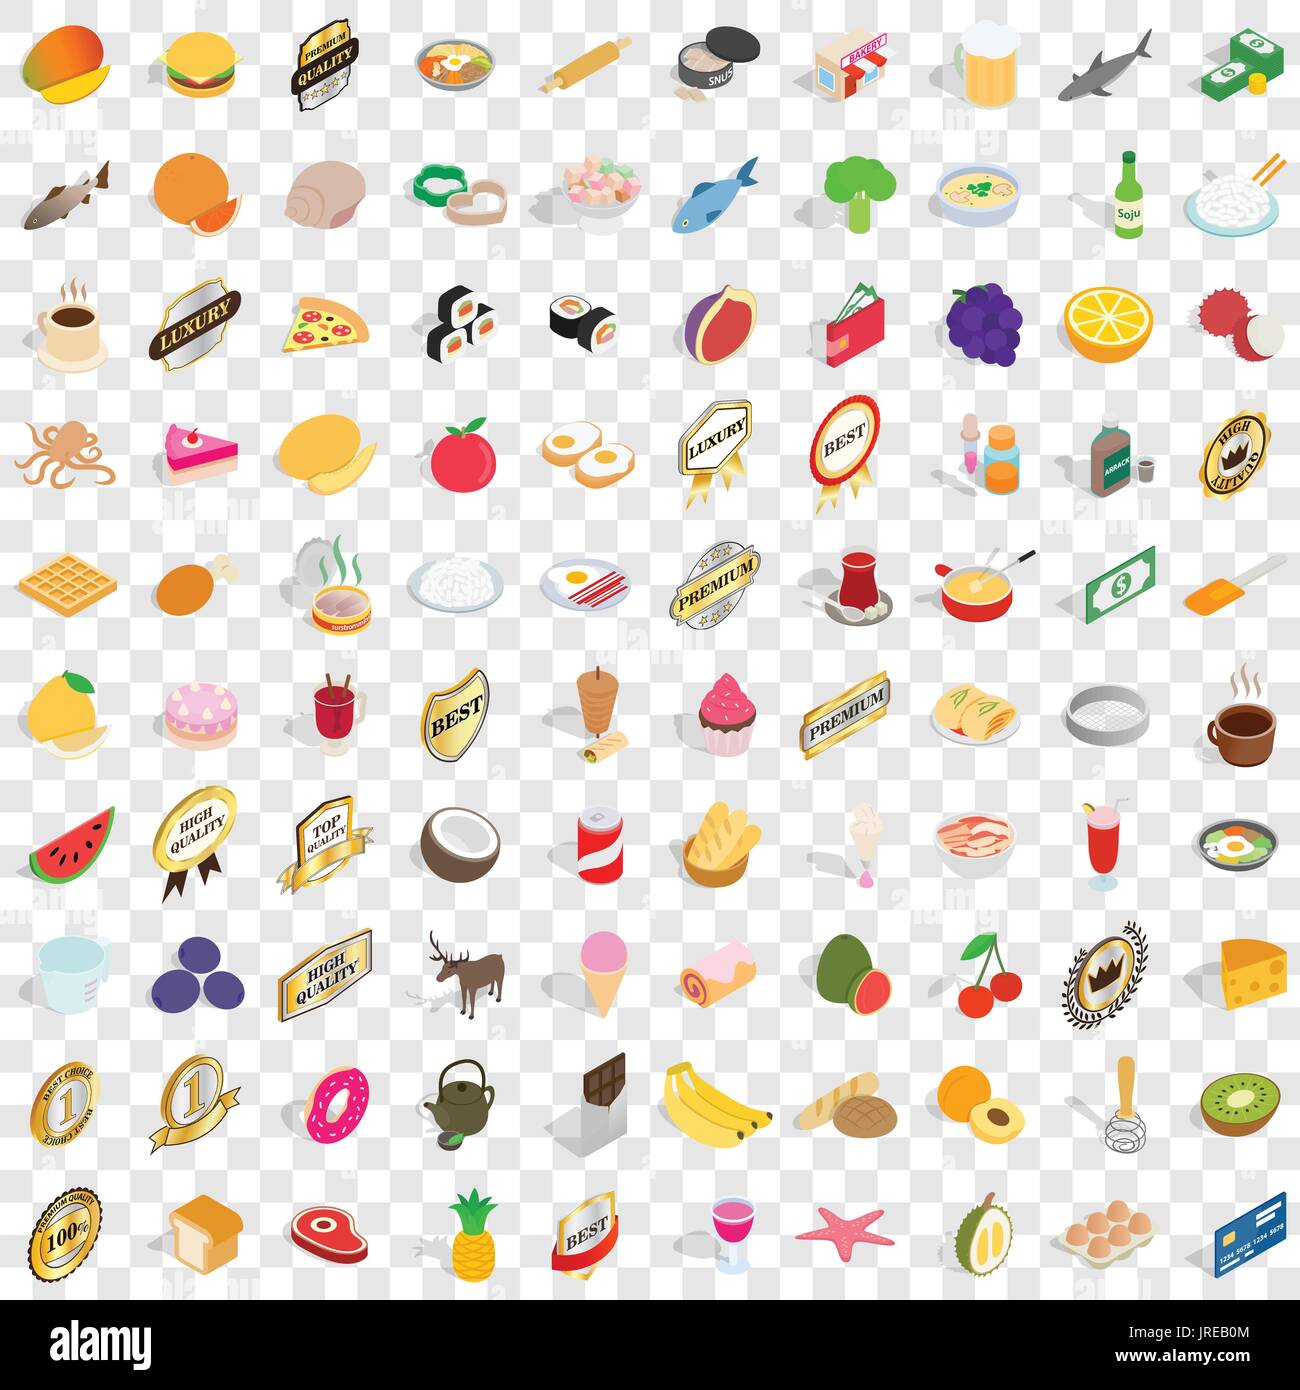 100 grocery shopping icons set, isometric 3d style Stock Vector